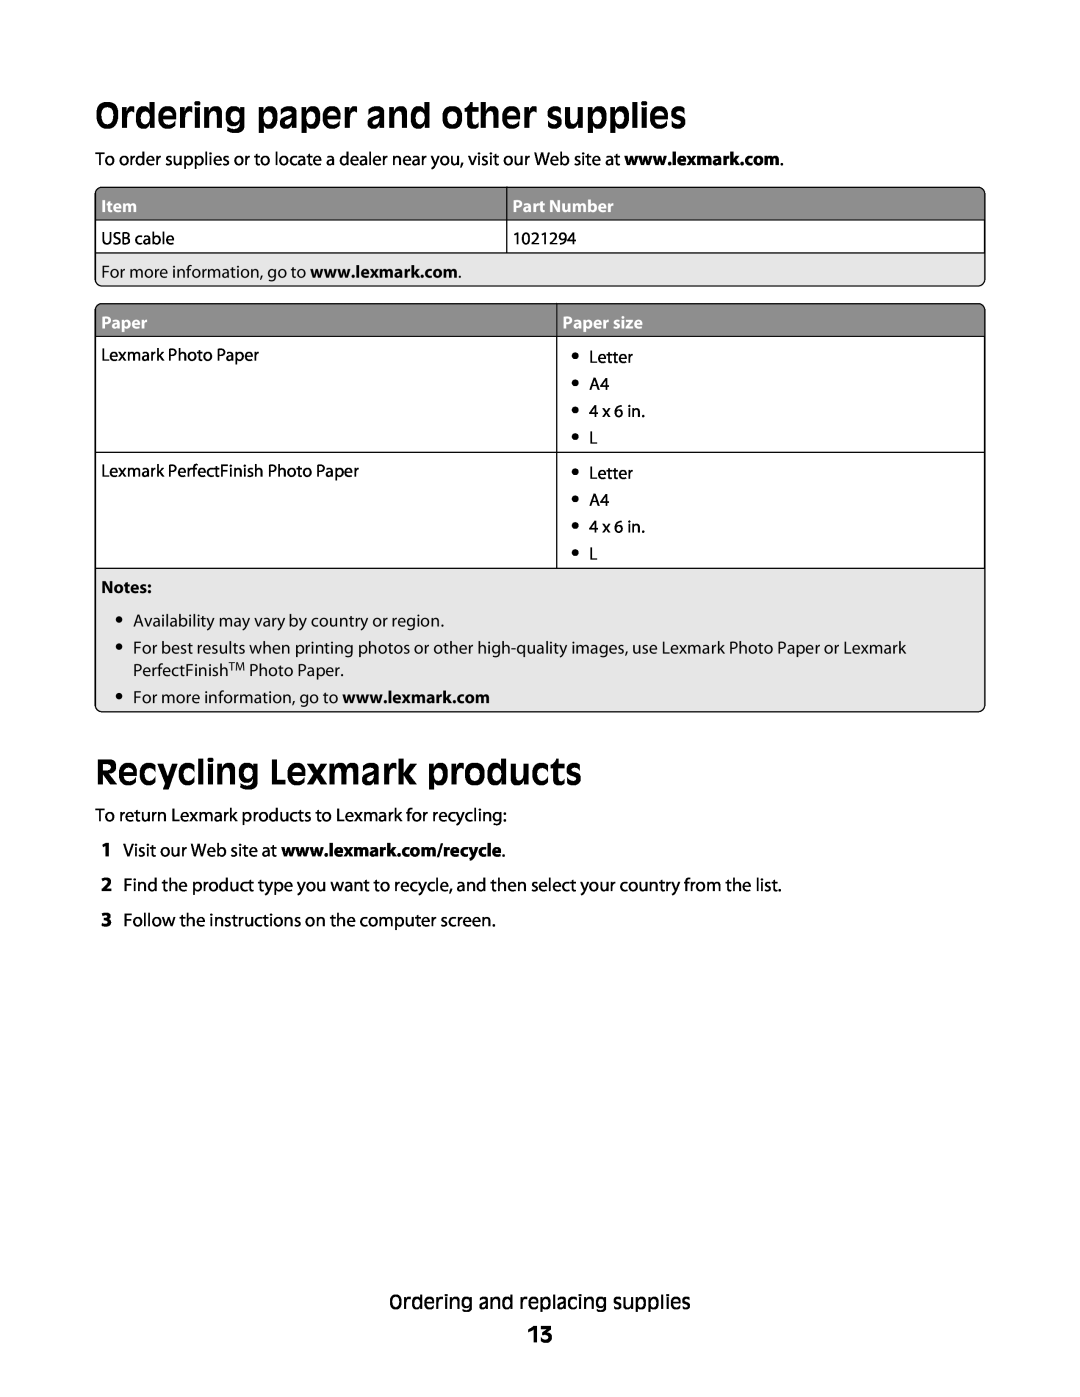 Lexmark 30E, S500, 301 manual Ordering paper and other supplies, Recycling Lexmark products, Part Number, Paper size 